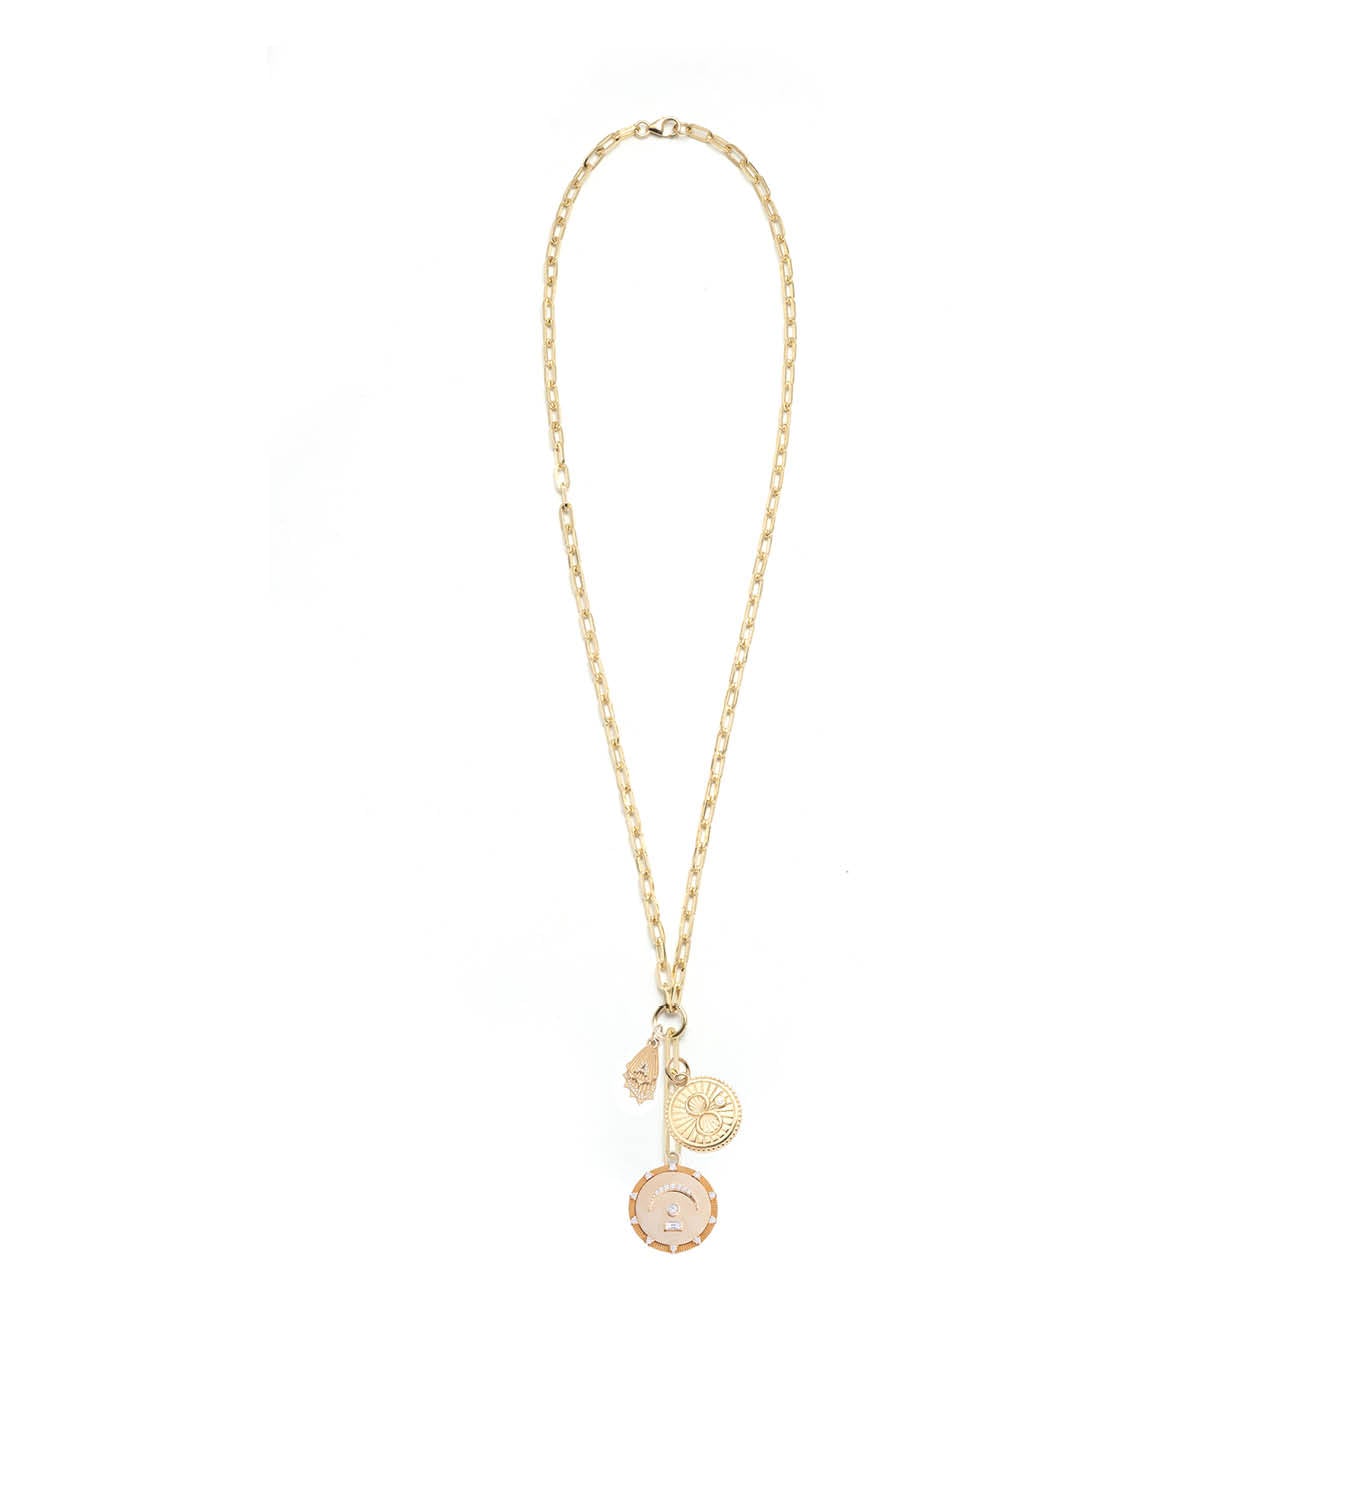 Pause, Balance & Reverie : Classic Fob Clip Extension Chain Necklace